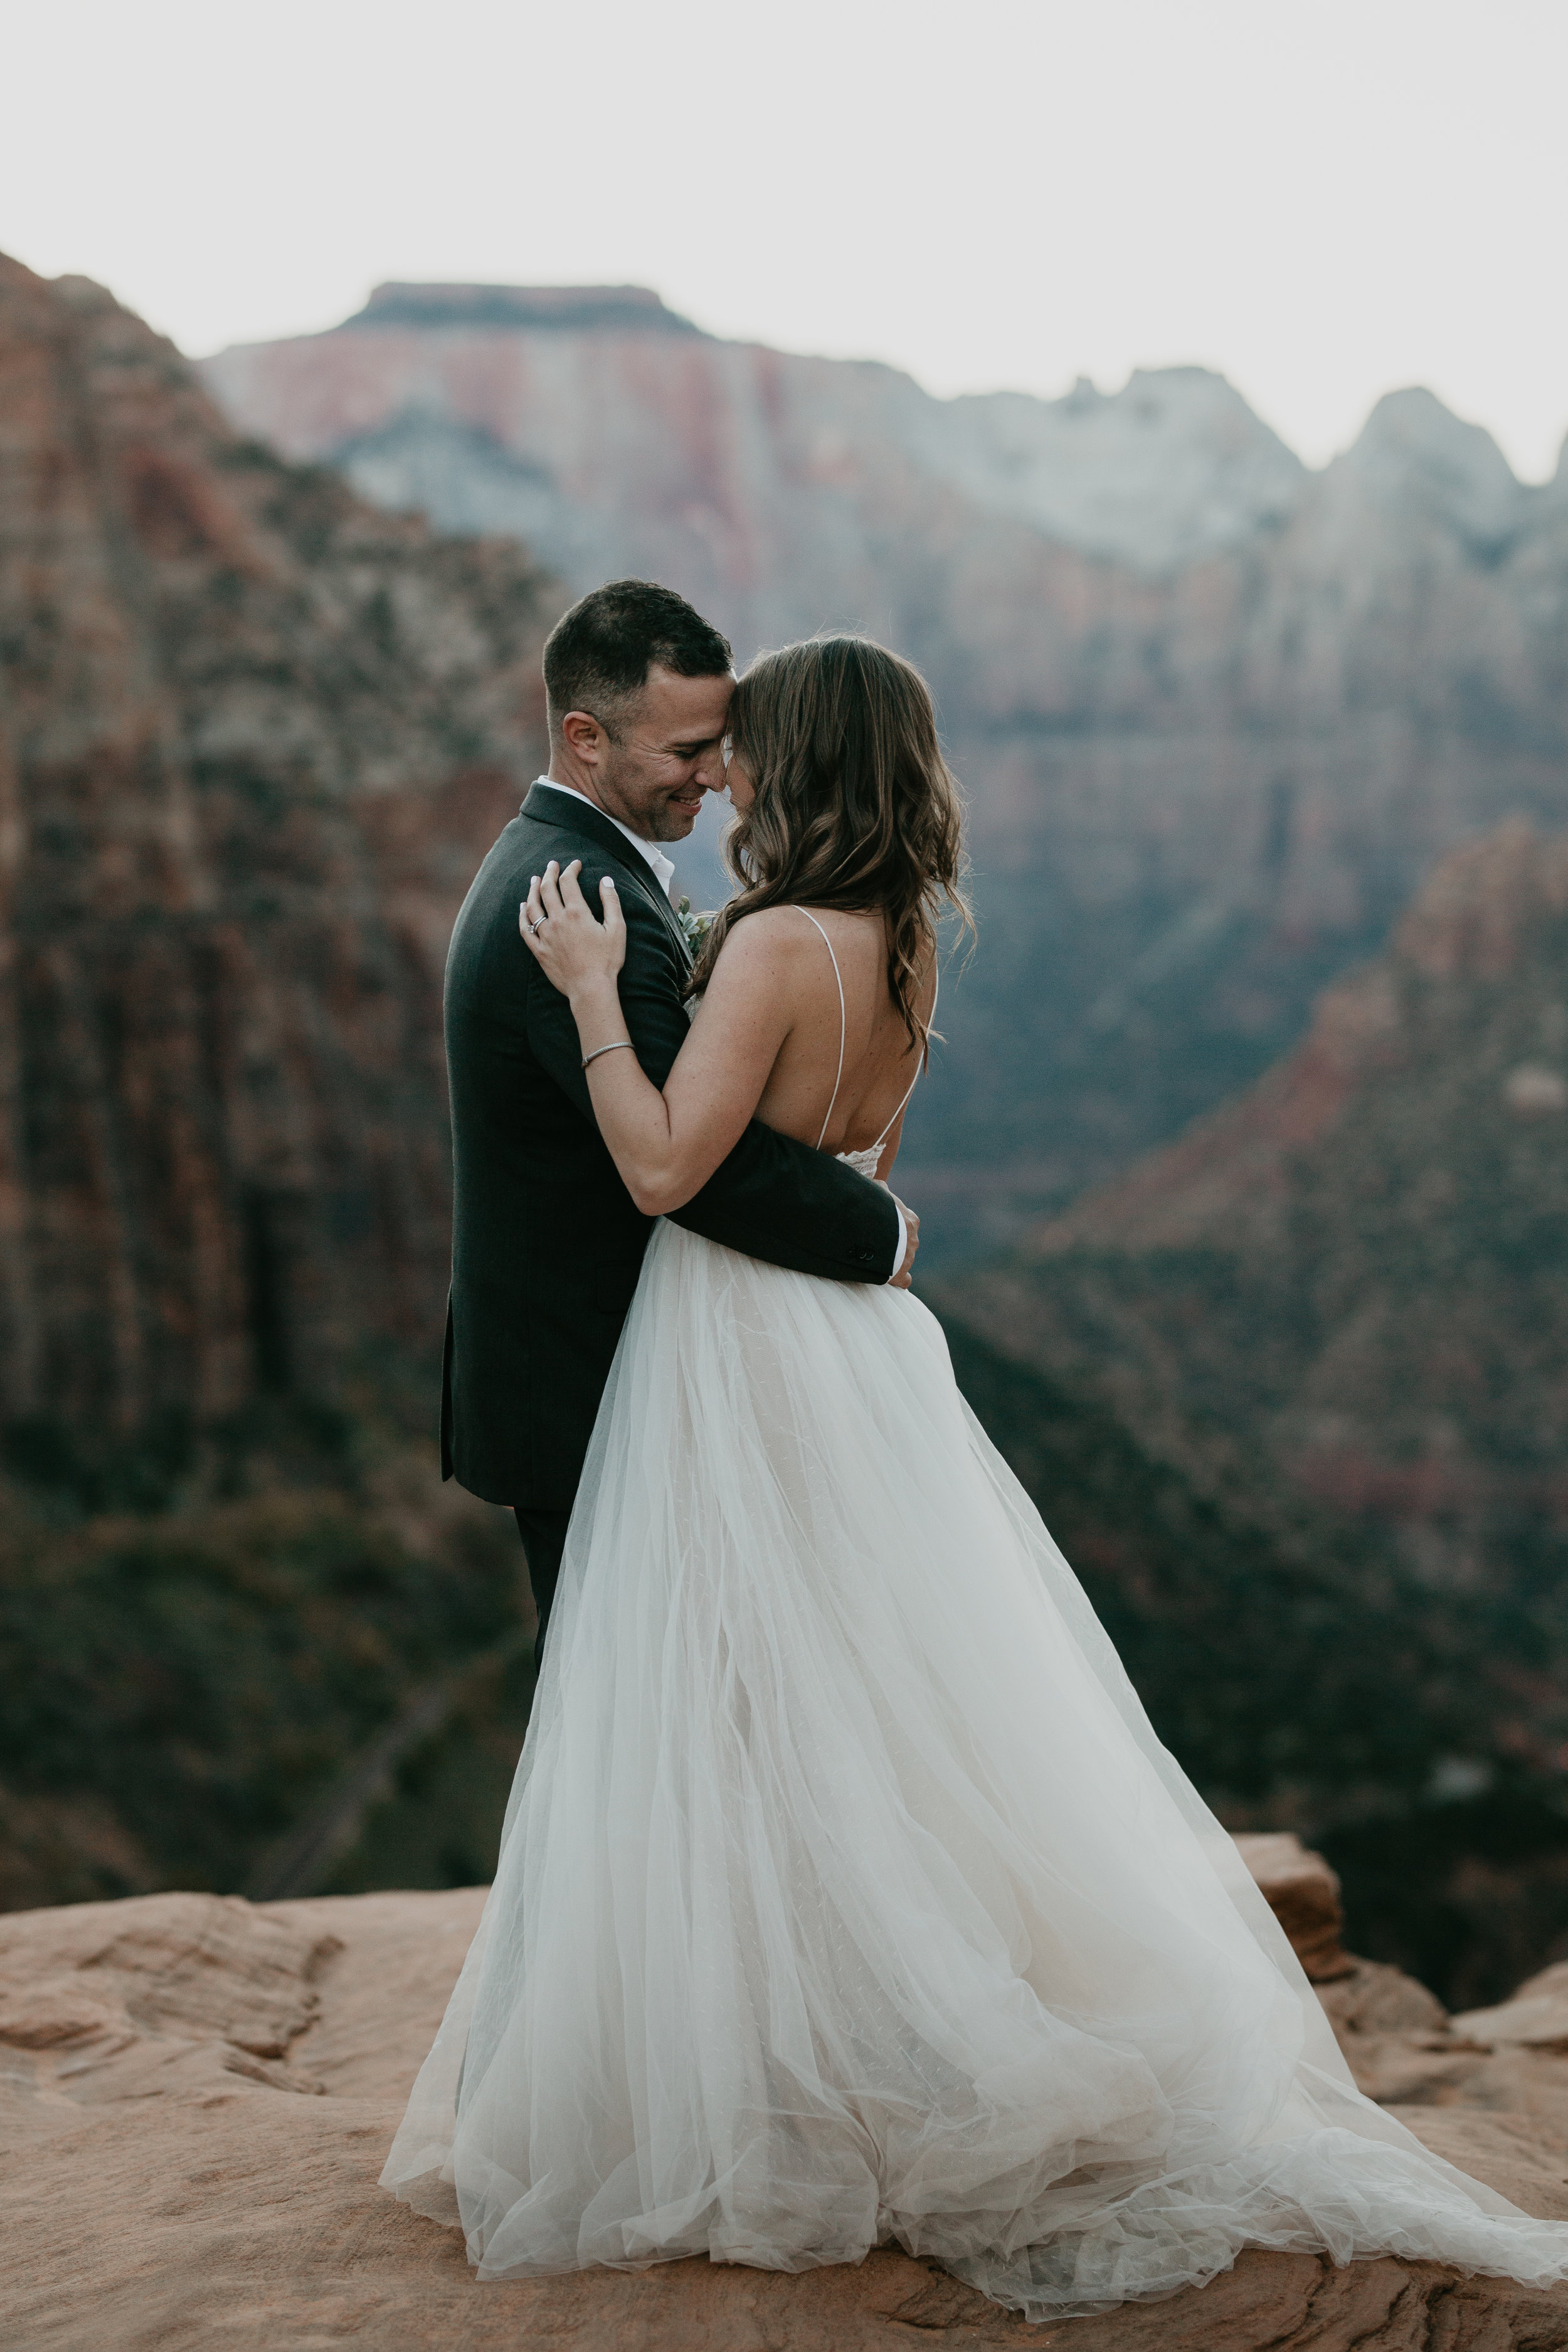 nicole-daacke-photography-zion-national-park-elopement-photographer-canyon-overlook-trail-elope-hiking-adventure-wedding-photos-fall-utah-red-rock-canyon-stgeorge-eloping-photographer-81.jpg